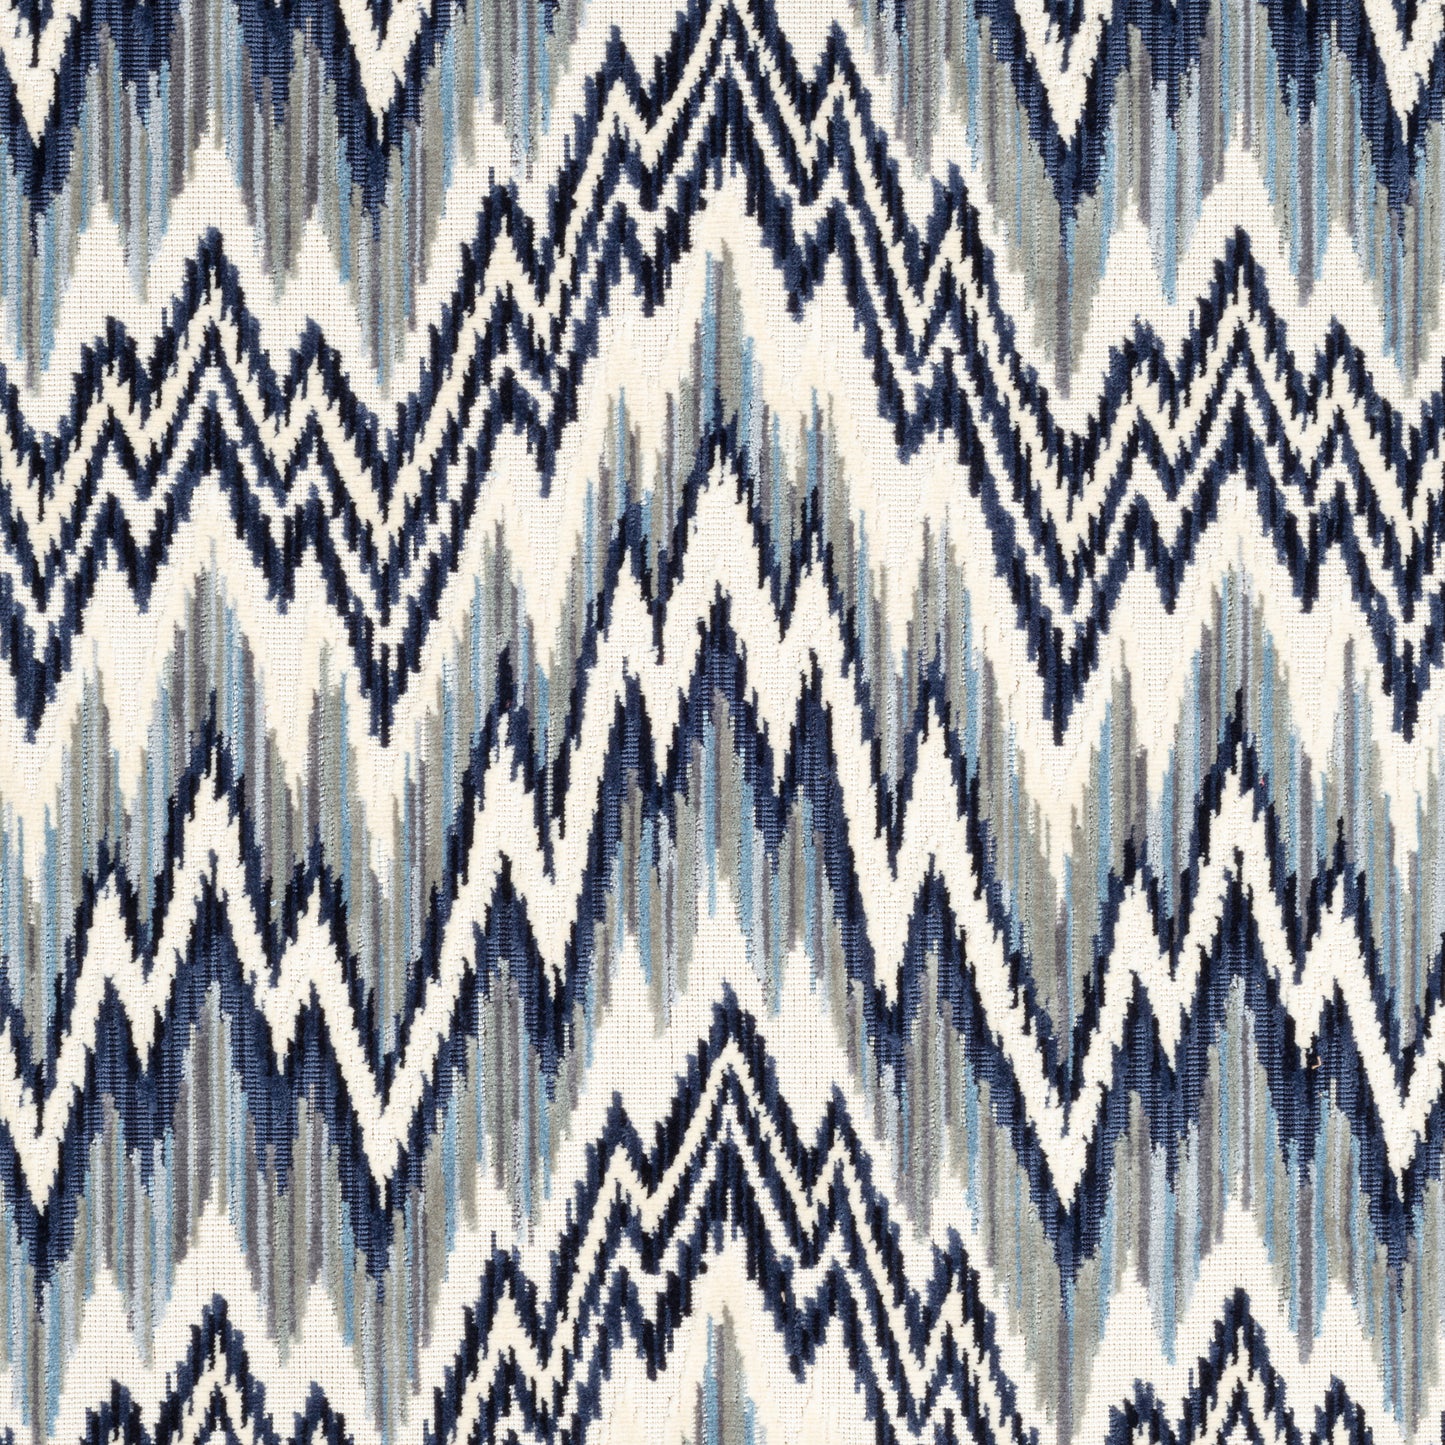 Purchase Thibaut Fabric Item W72820 pattern name Rhythm Velvet color Sterling and Navy